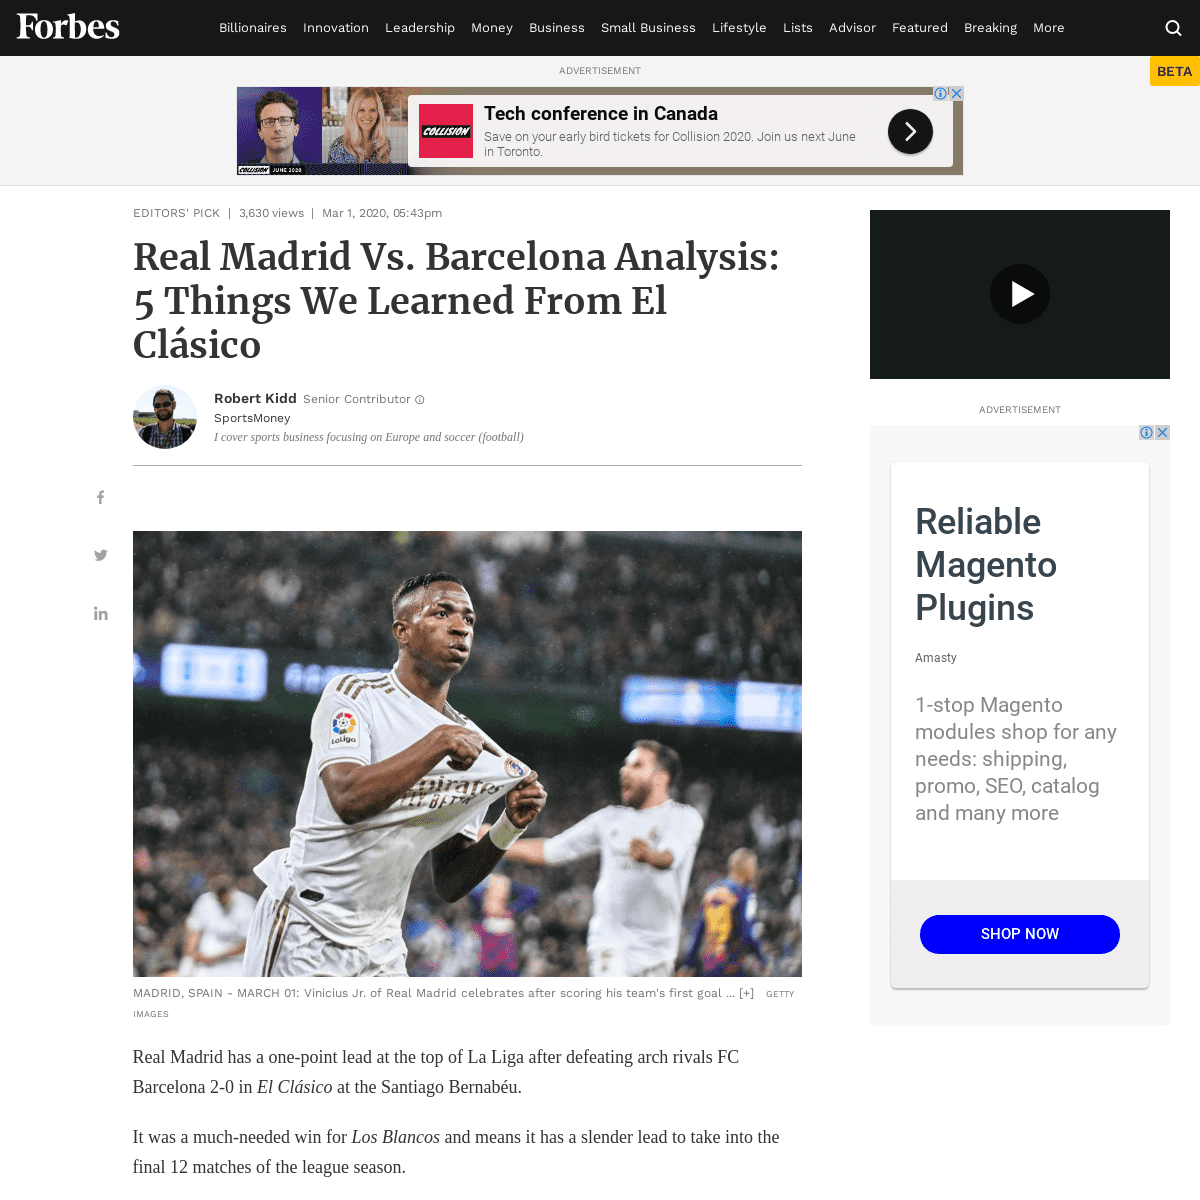 A complete backup of www.forbes.com/sites/robertkidd/2020/03/01/real-madrid-vs-barcelona-analysis-5-things-we-learned-from-el-cl